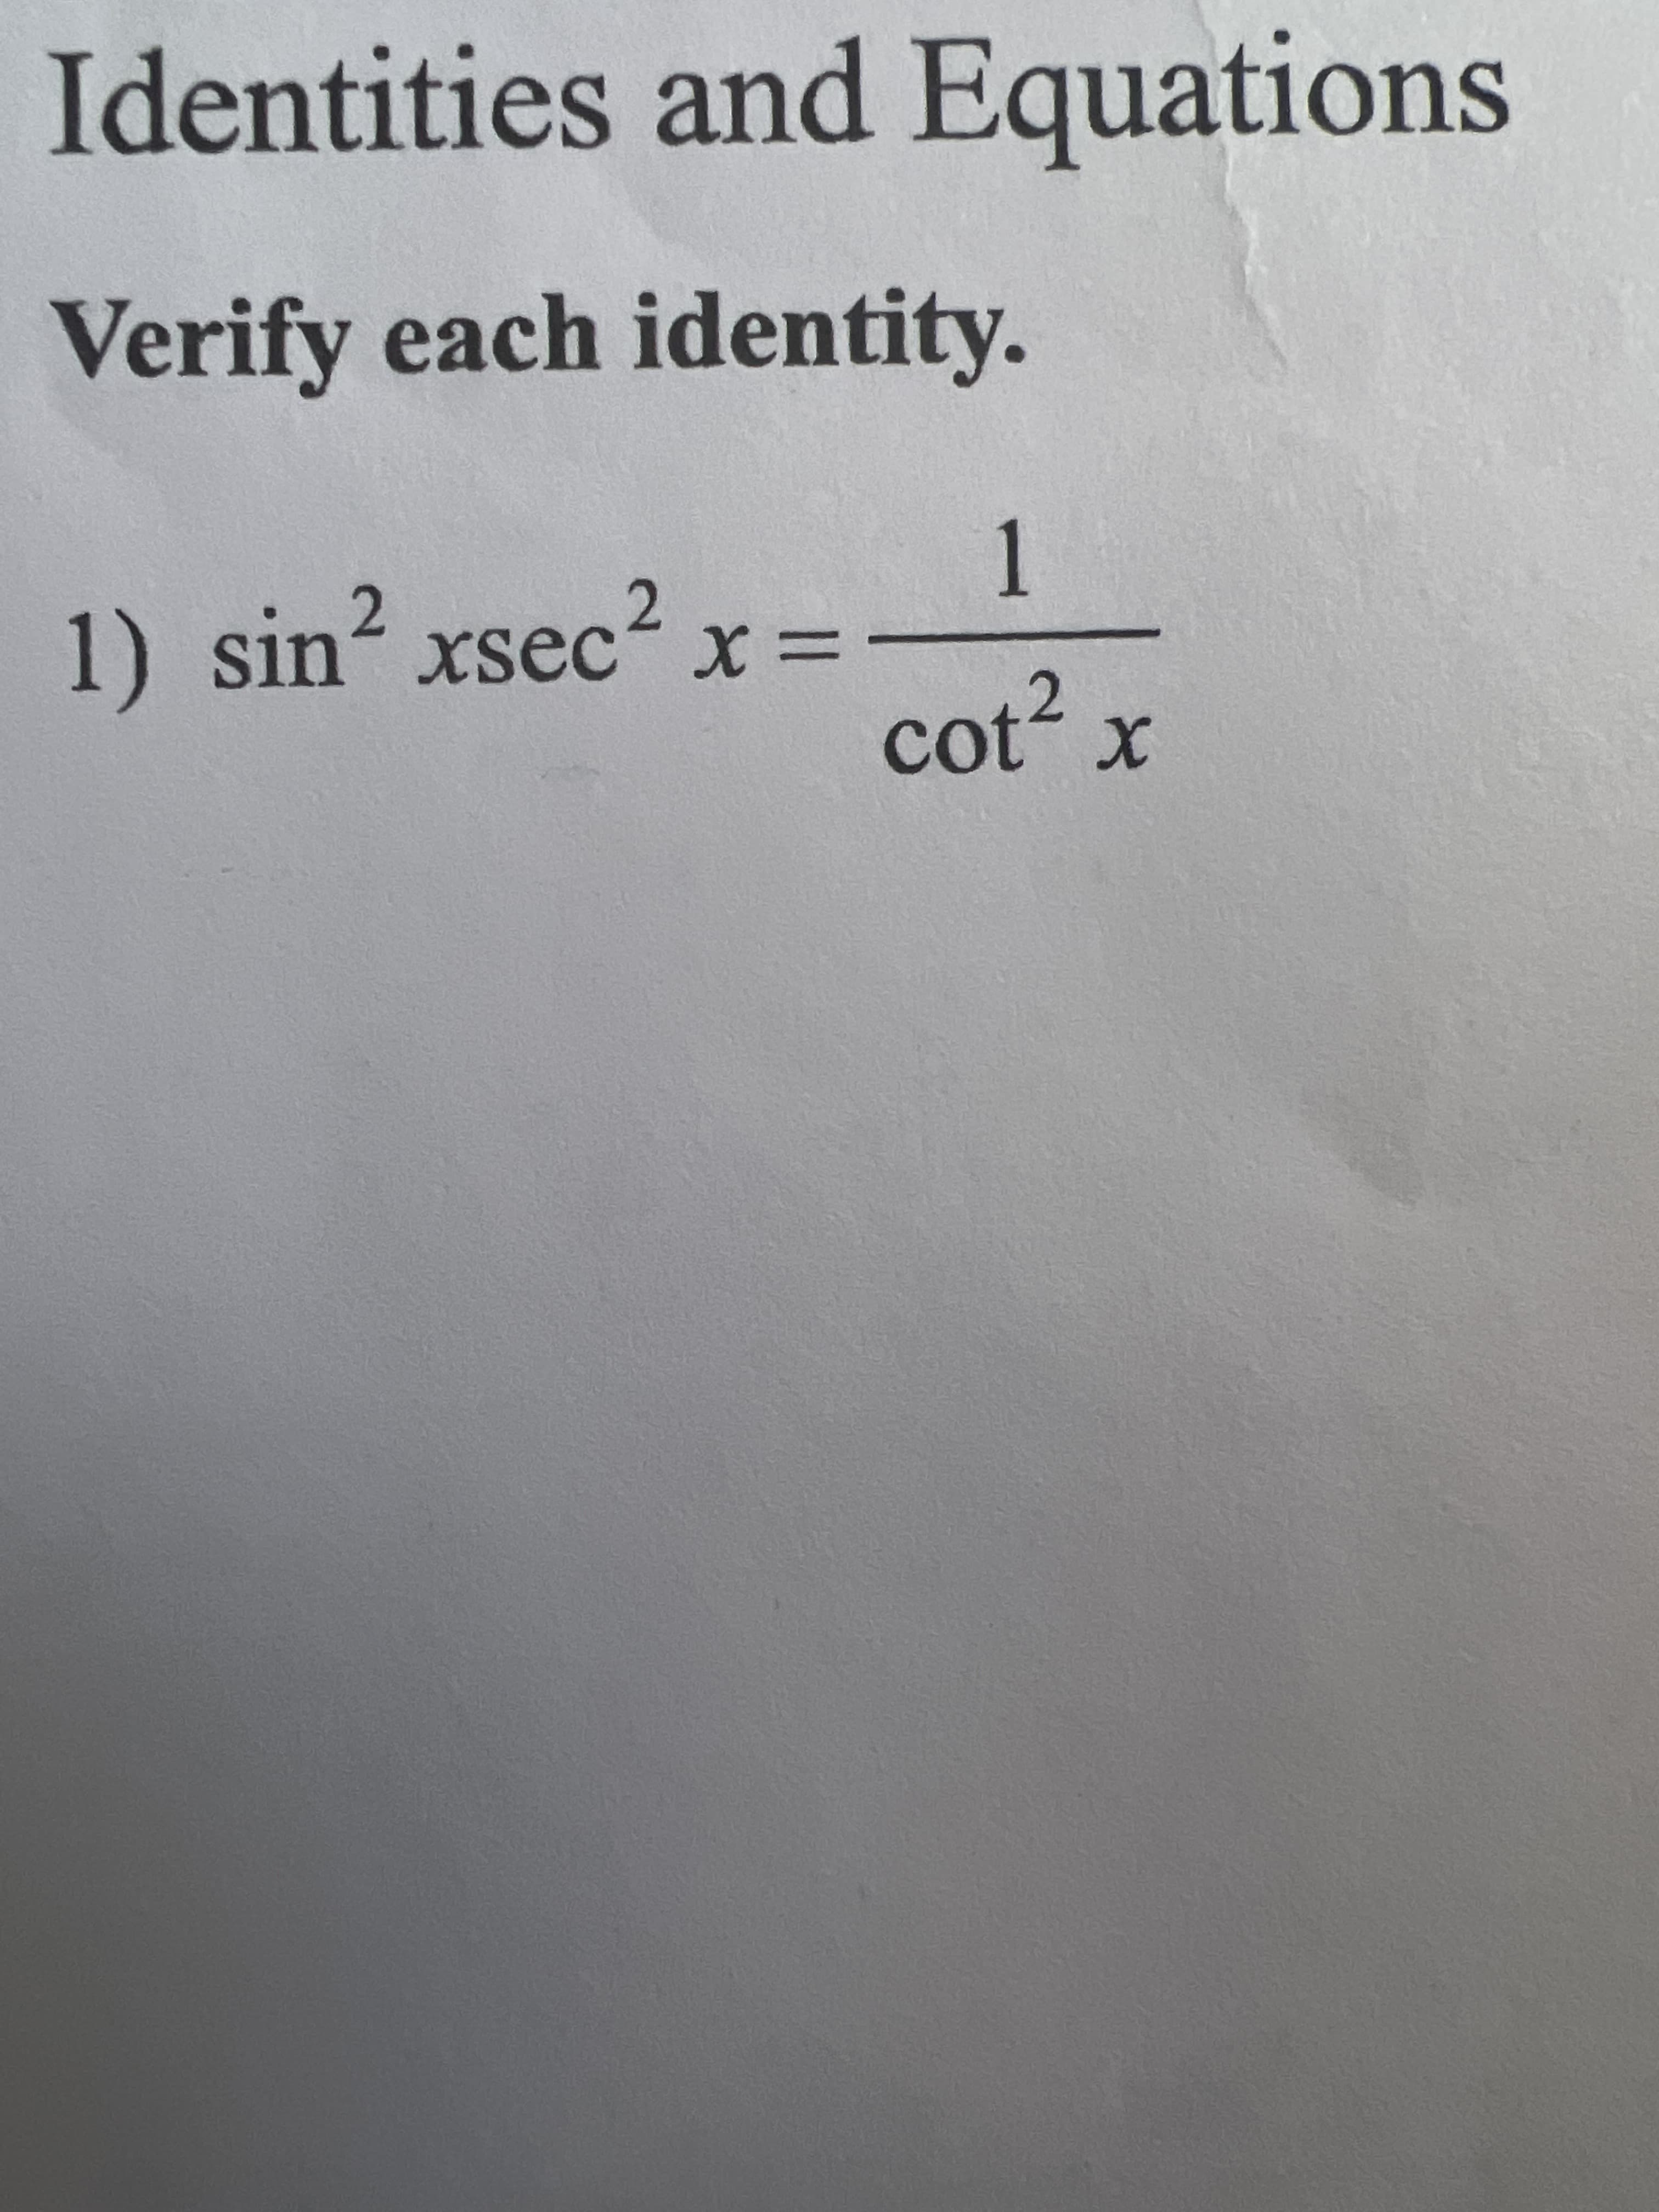 Identities and Equations
Verify each identity.
1) sin2 xsec?
x =
cot2
